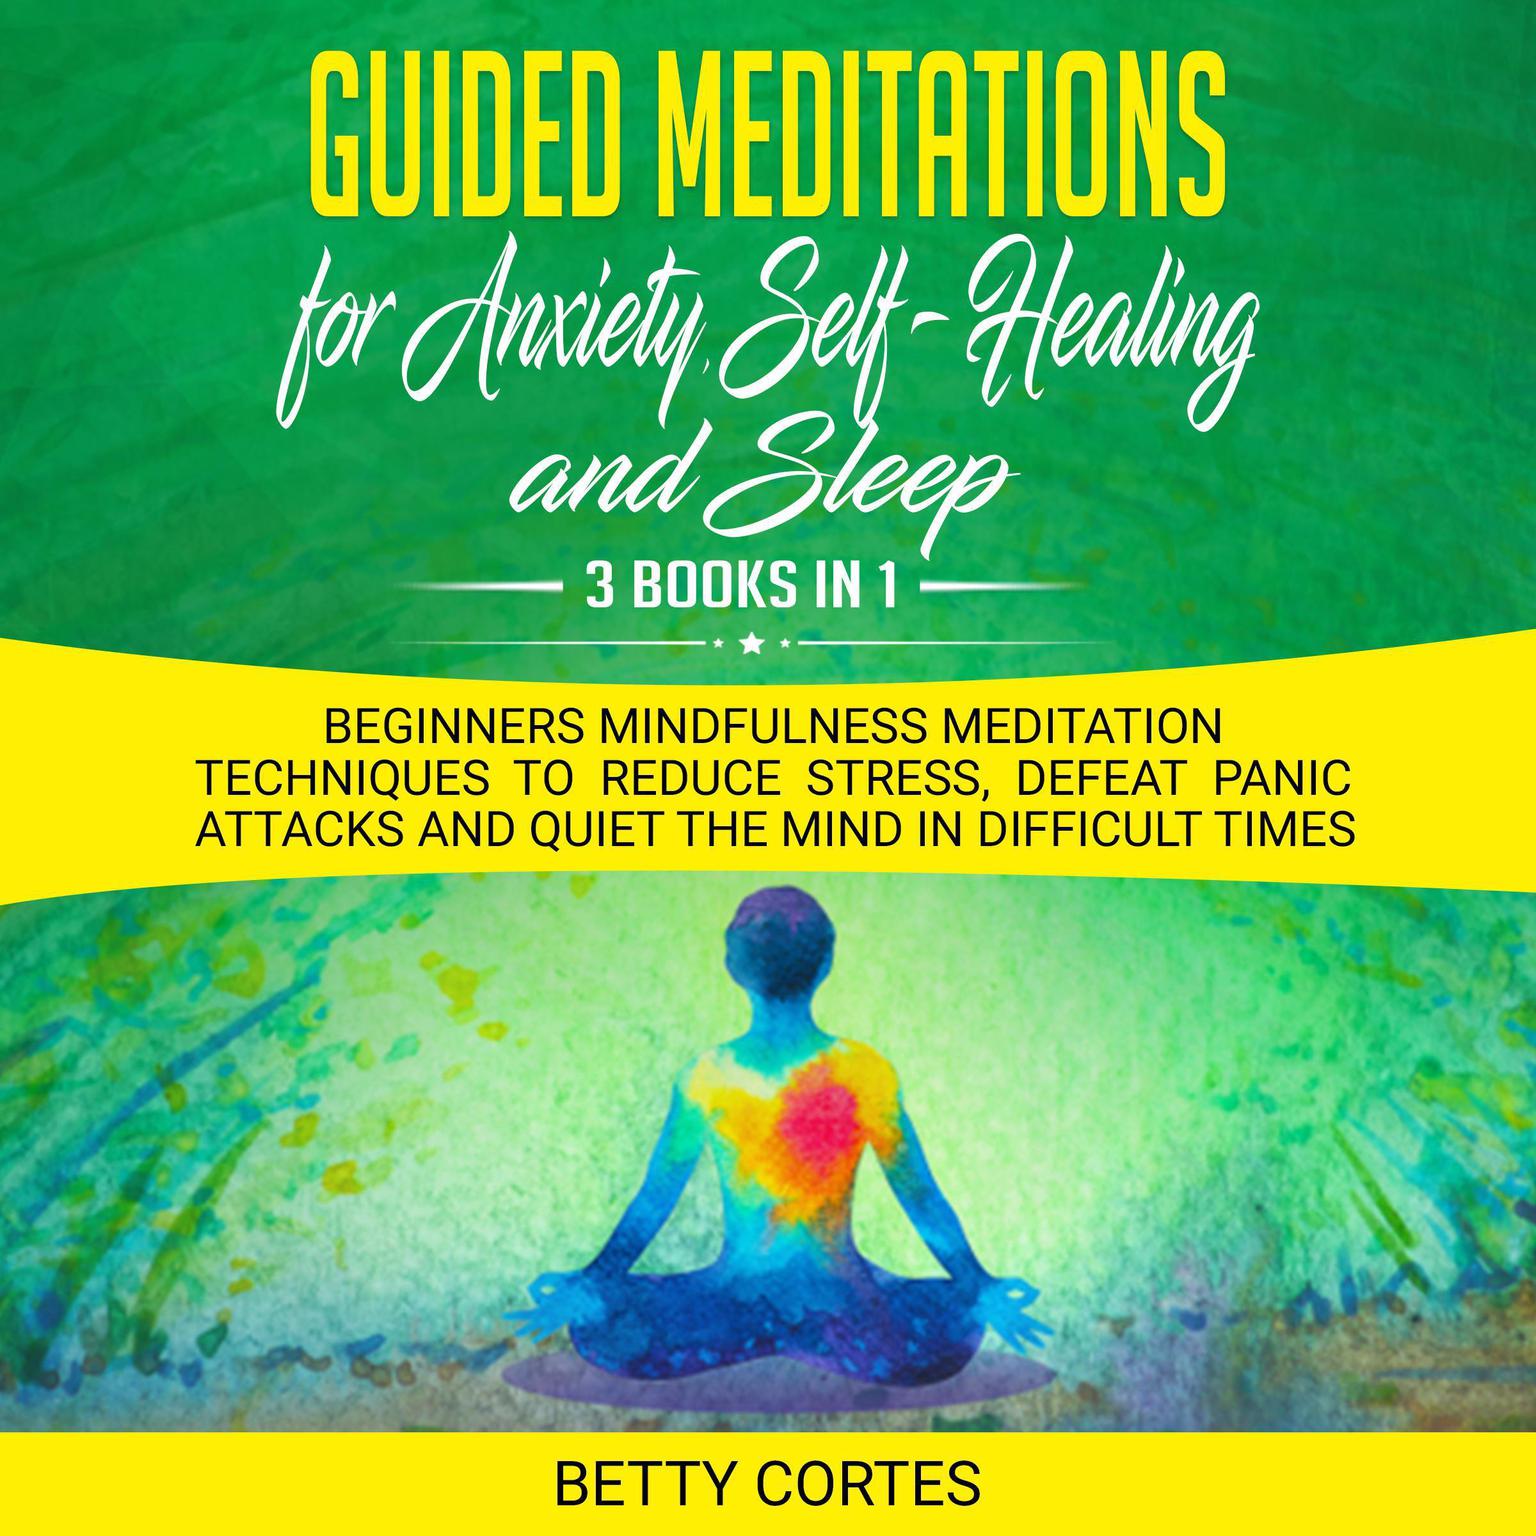 Guided Meditations for Anxiety, Self-Healing and Sleep - 3 Books in 1 Beginners Mindfulness Meditation Techniques to reduce Stress, defeat Panic Attacks and Quiet the Mind in difficult Times Audiobook, by Betty Cortes